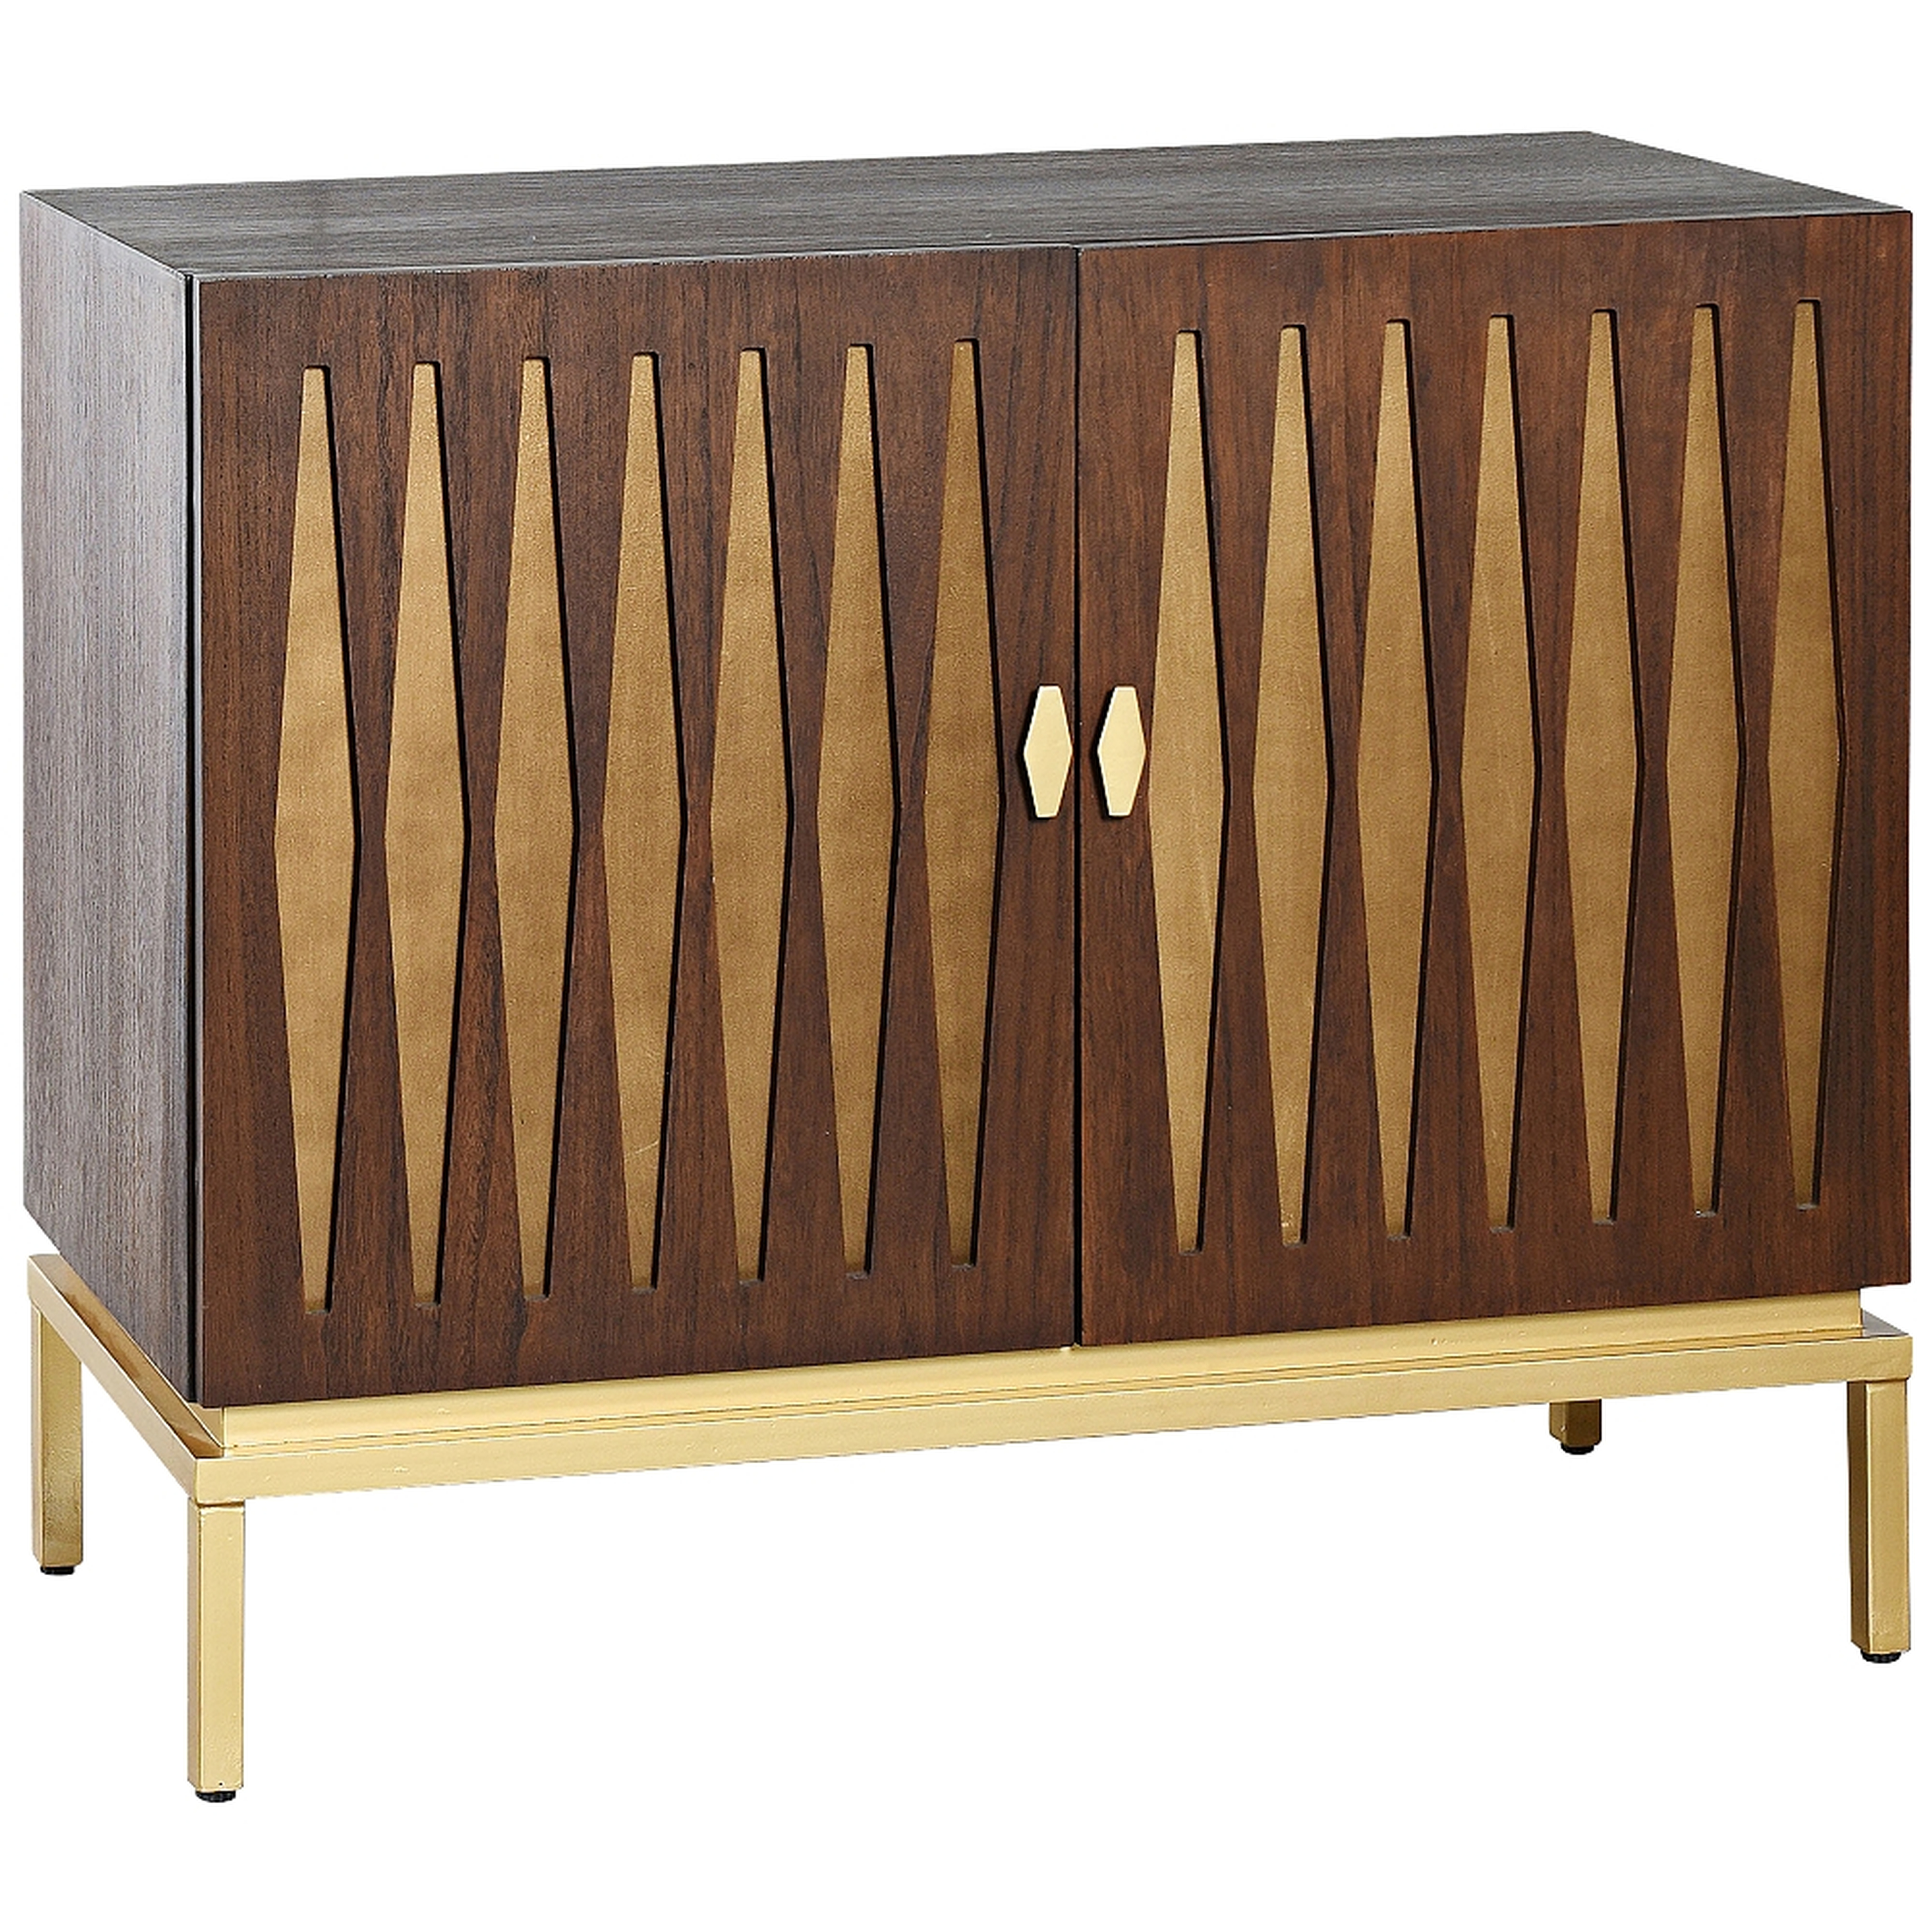 Ryker 38"W Chestnut Brown and Gold 2-Door Credenza Cabinet - Style # 89G88 - Lamps Plus